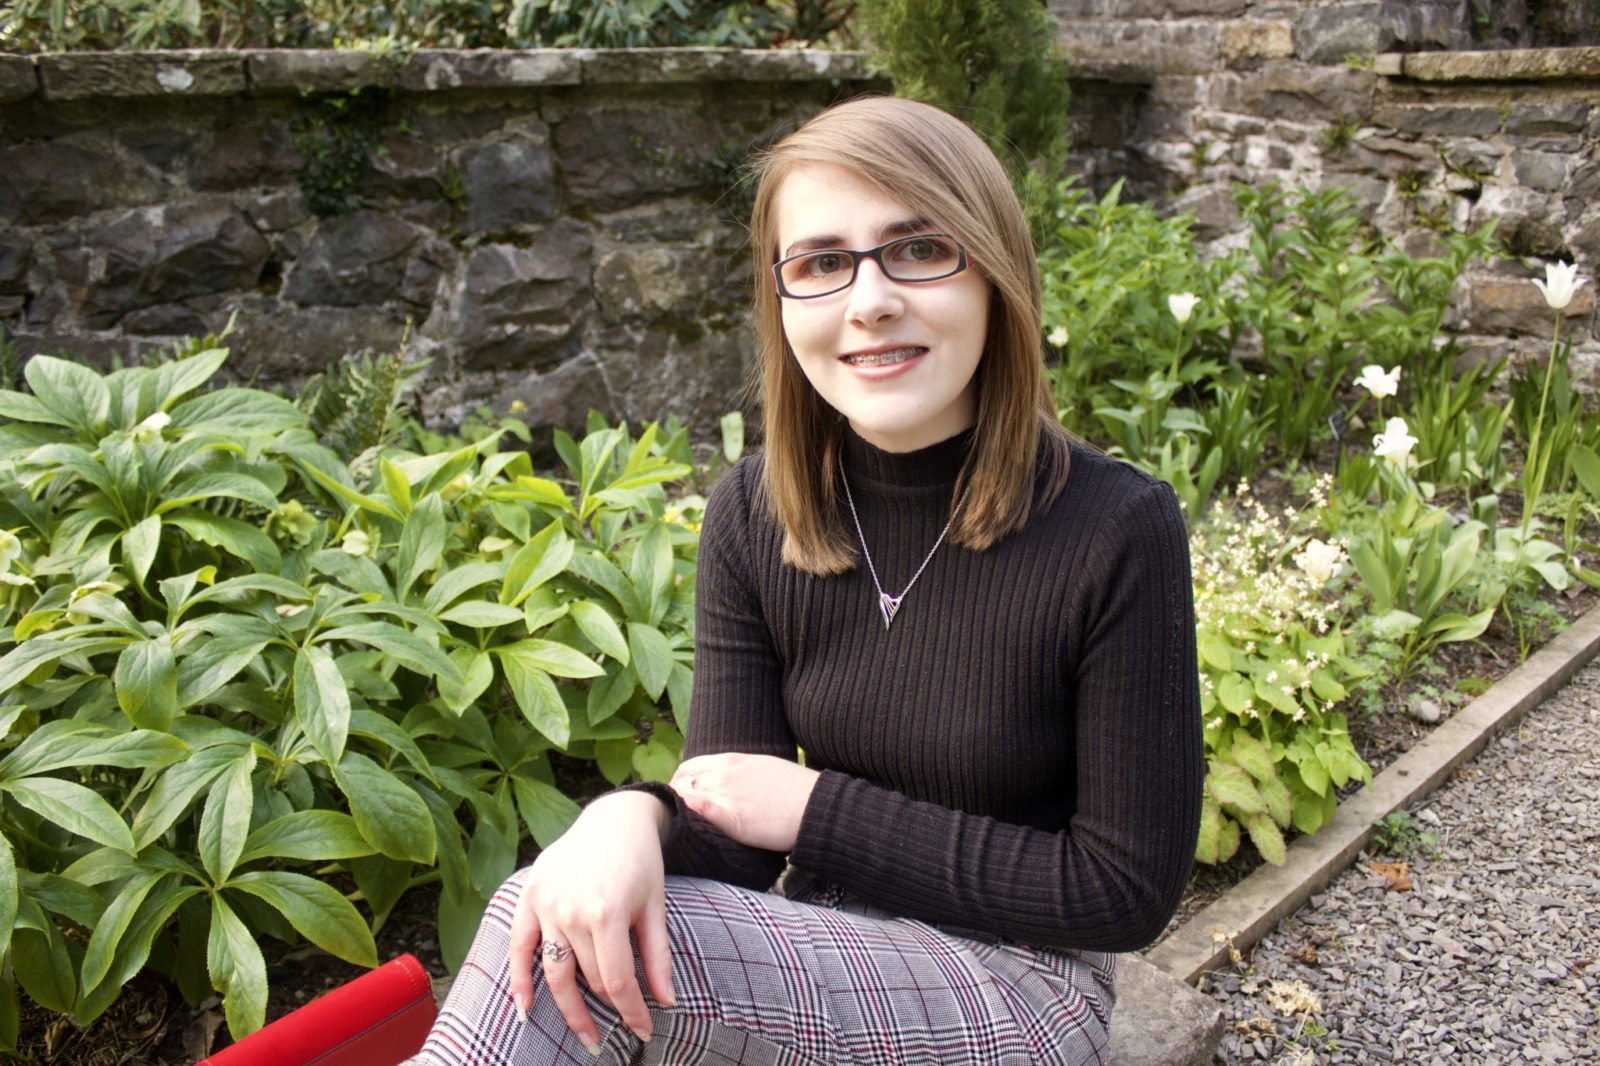 Elin sits with her legs crossed in front of a stone wall and greenery. She wears black glasses, plaid pants, and a black turtleneck.